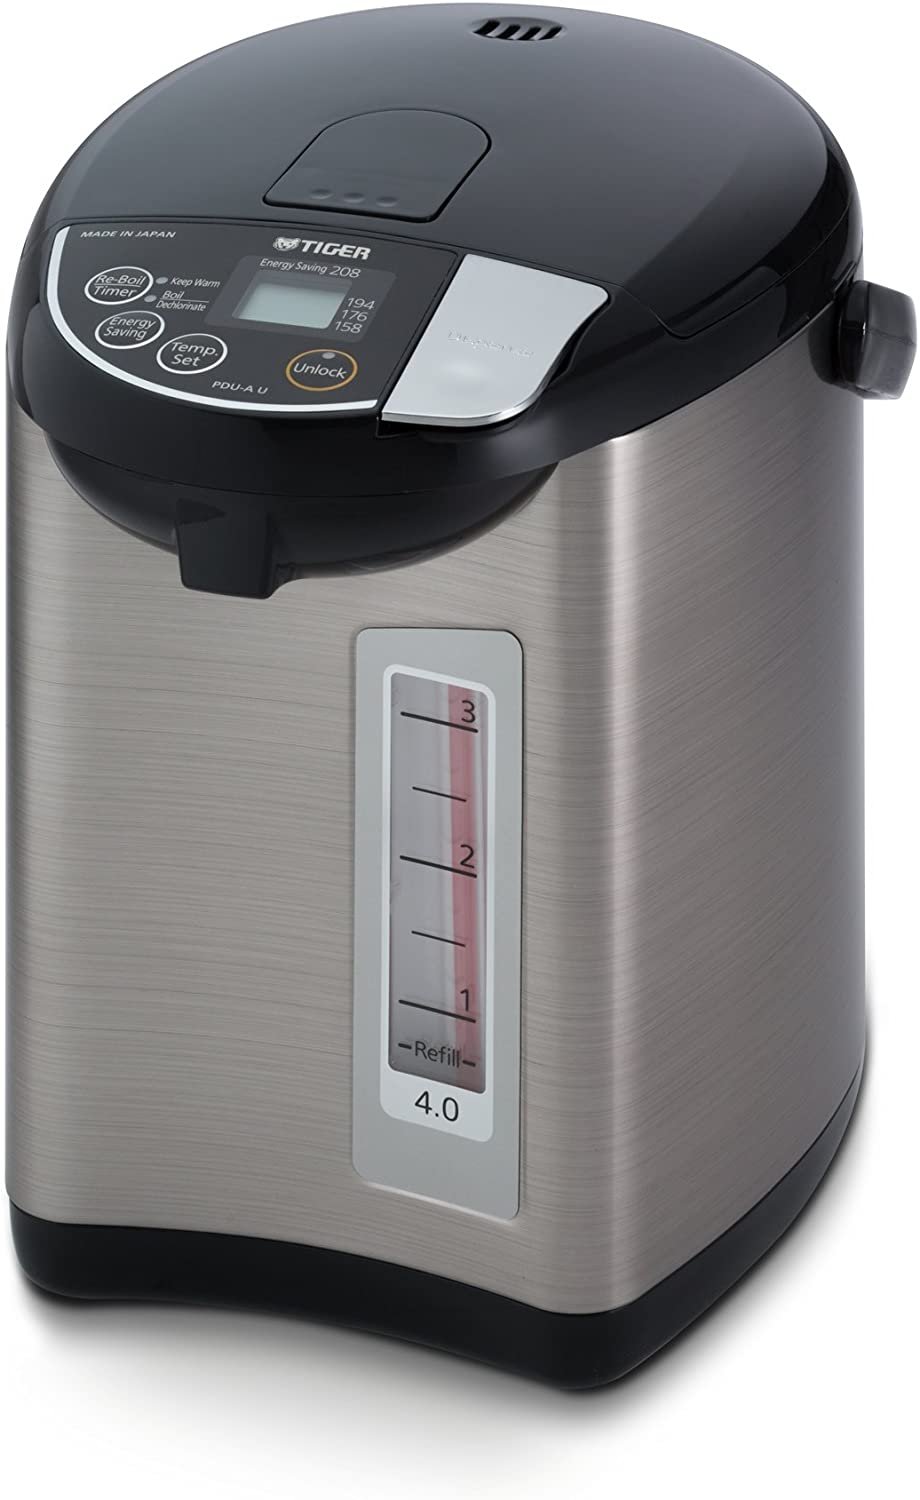 Tiger Water Heater kitchen appliance in stainless steel and black plastic.